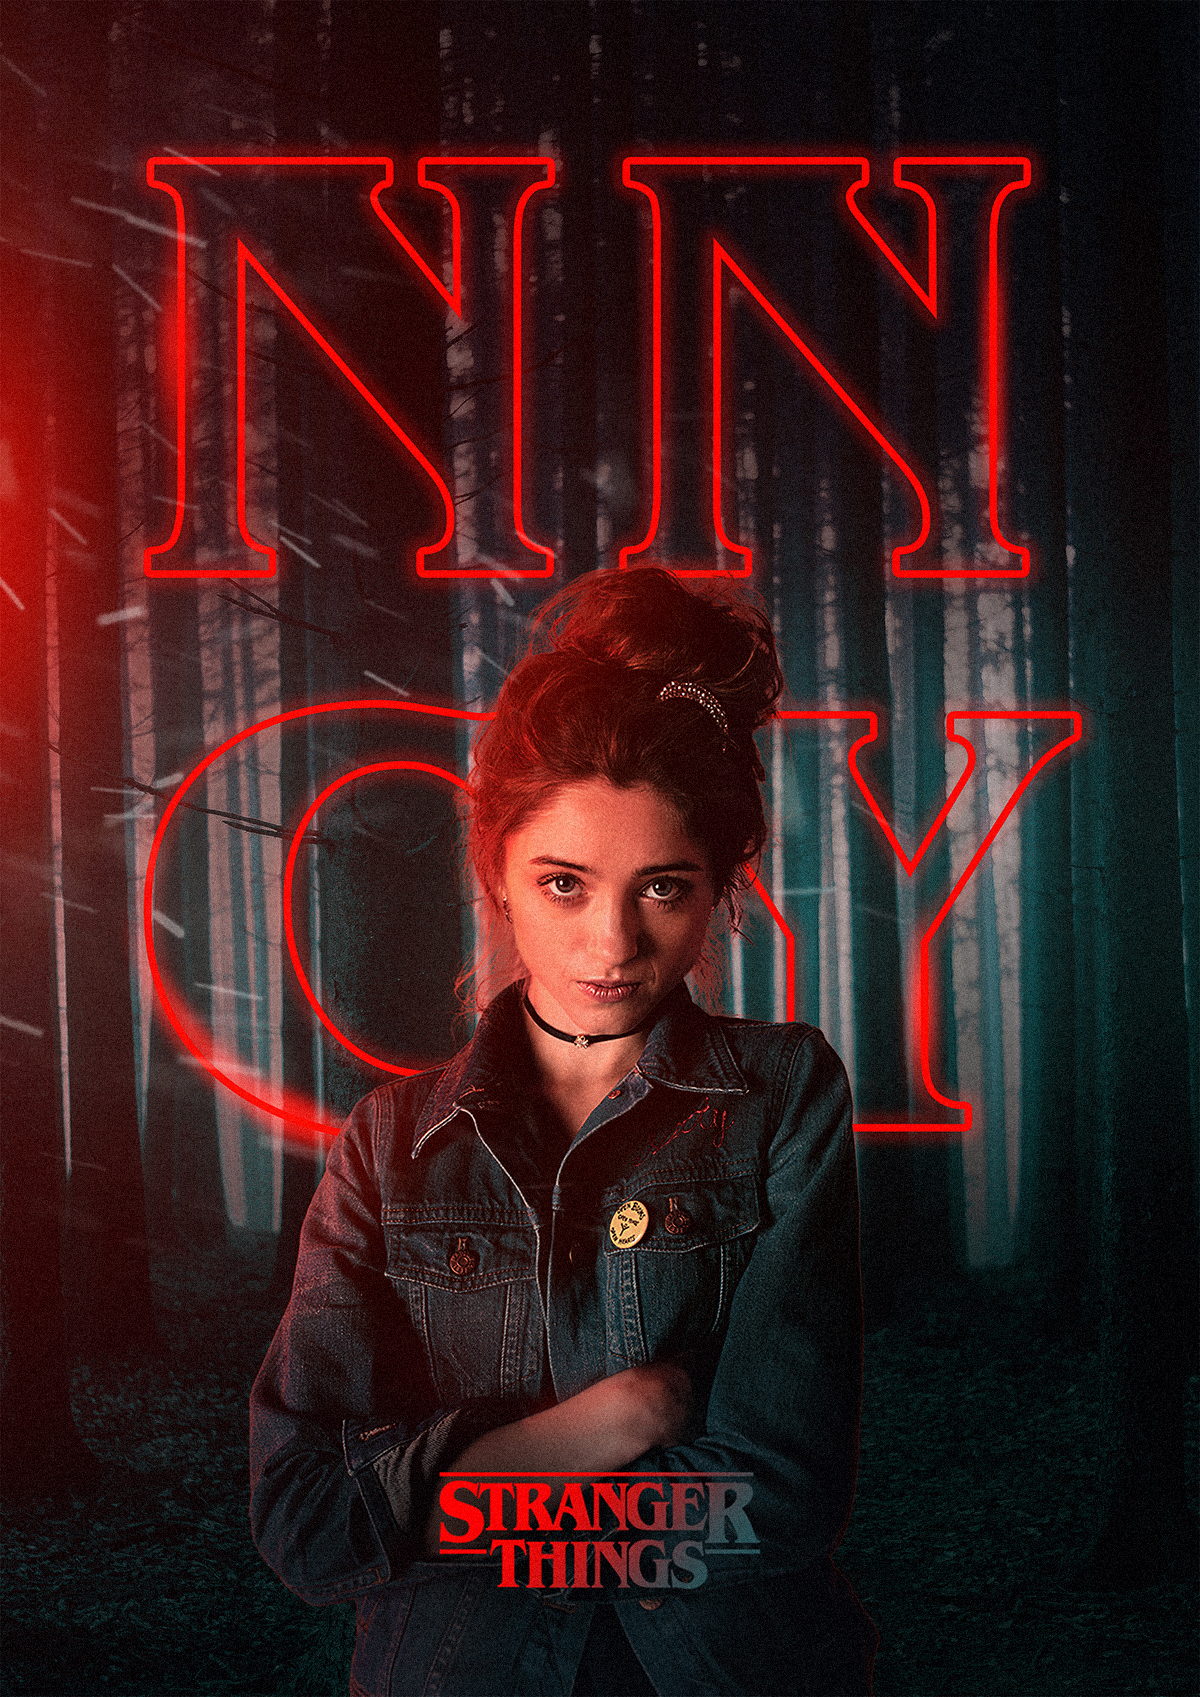 Rigved Sathe Stranger Things Posters (5)